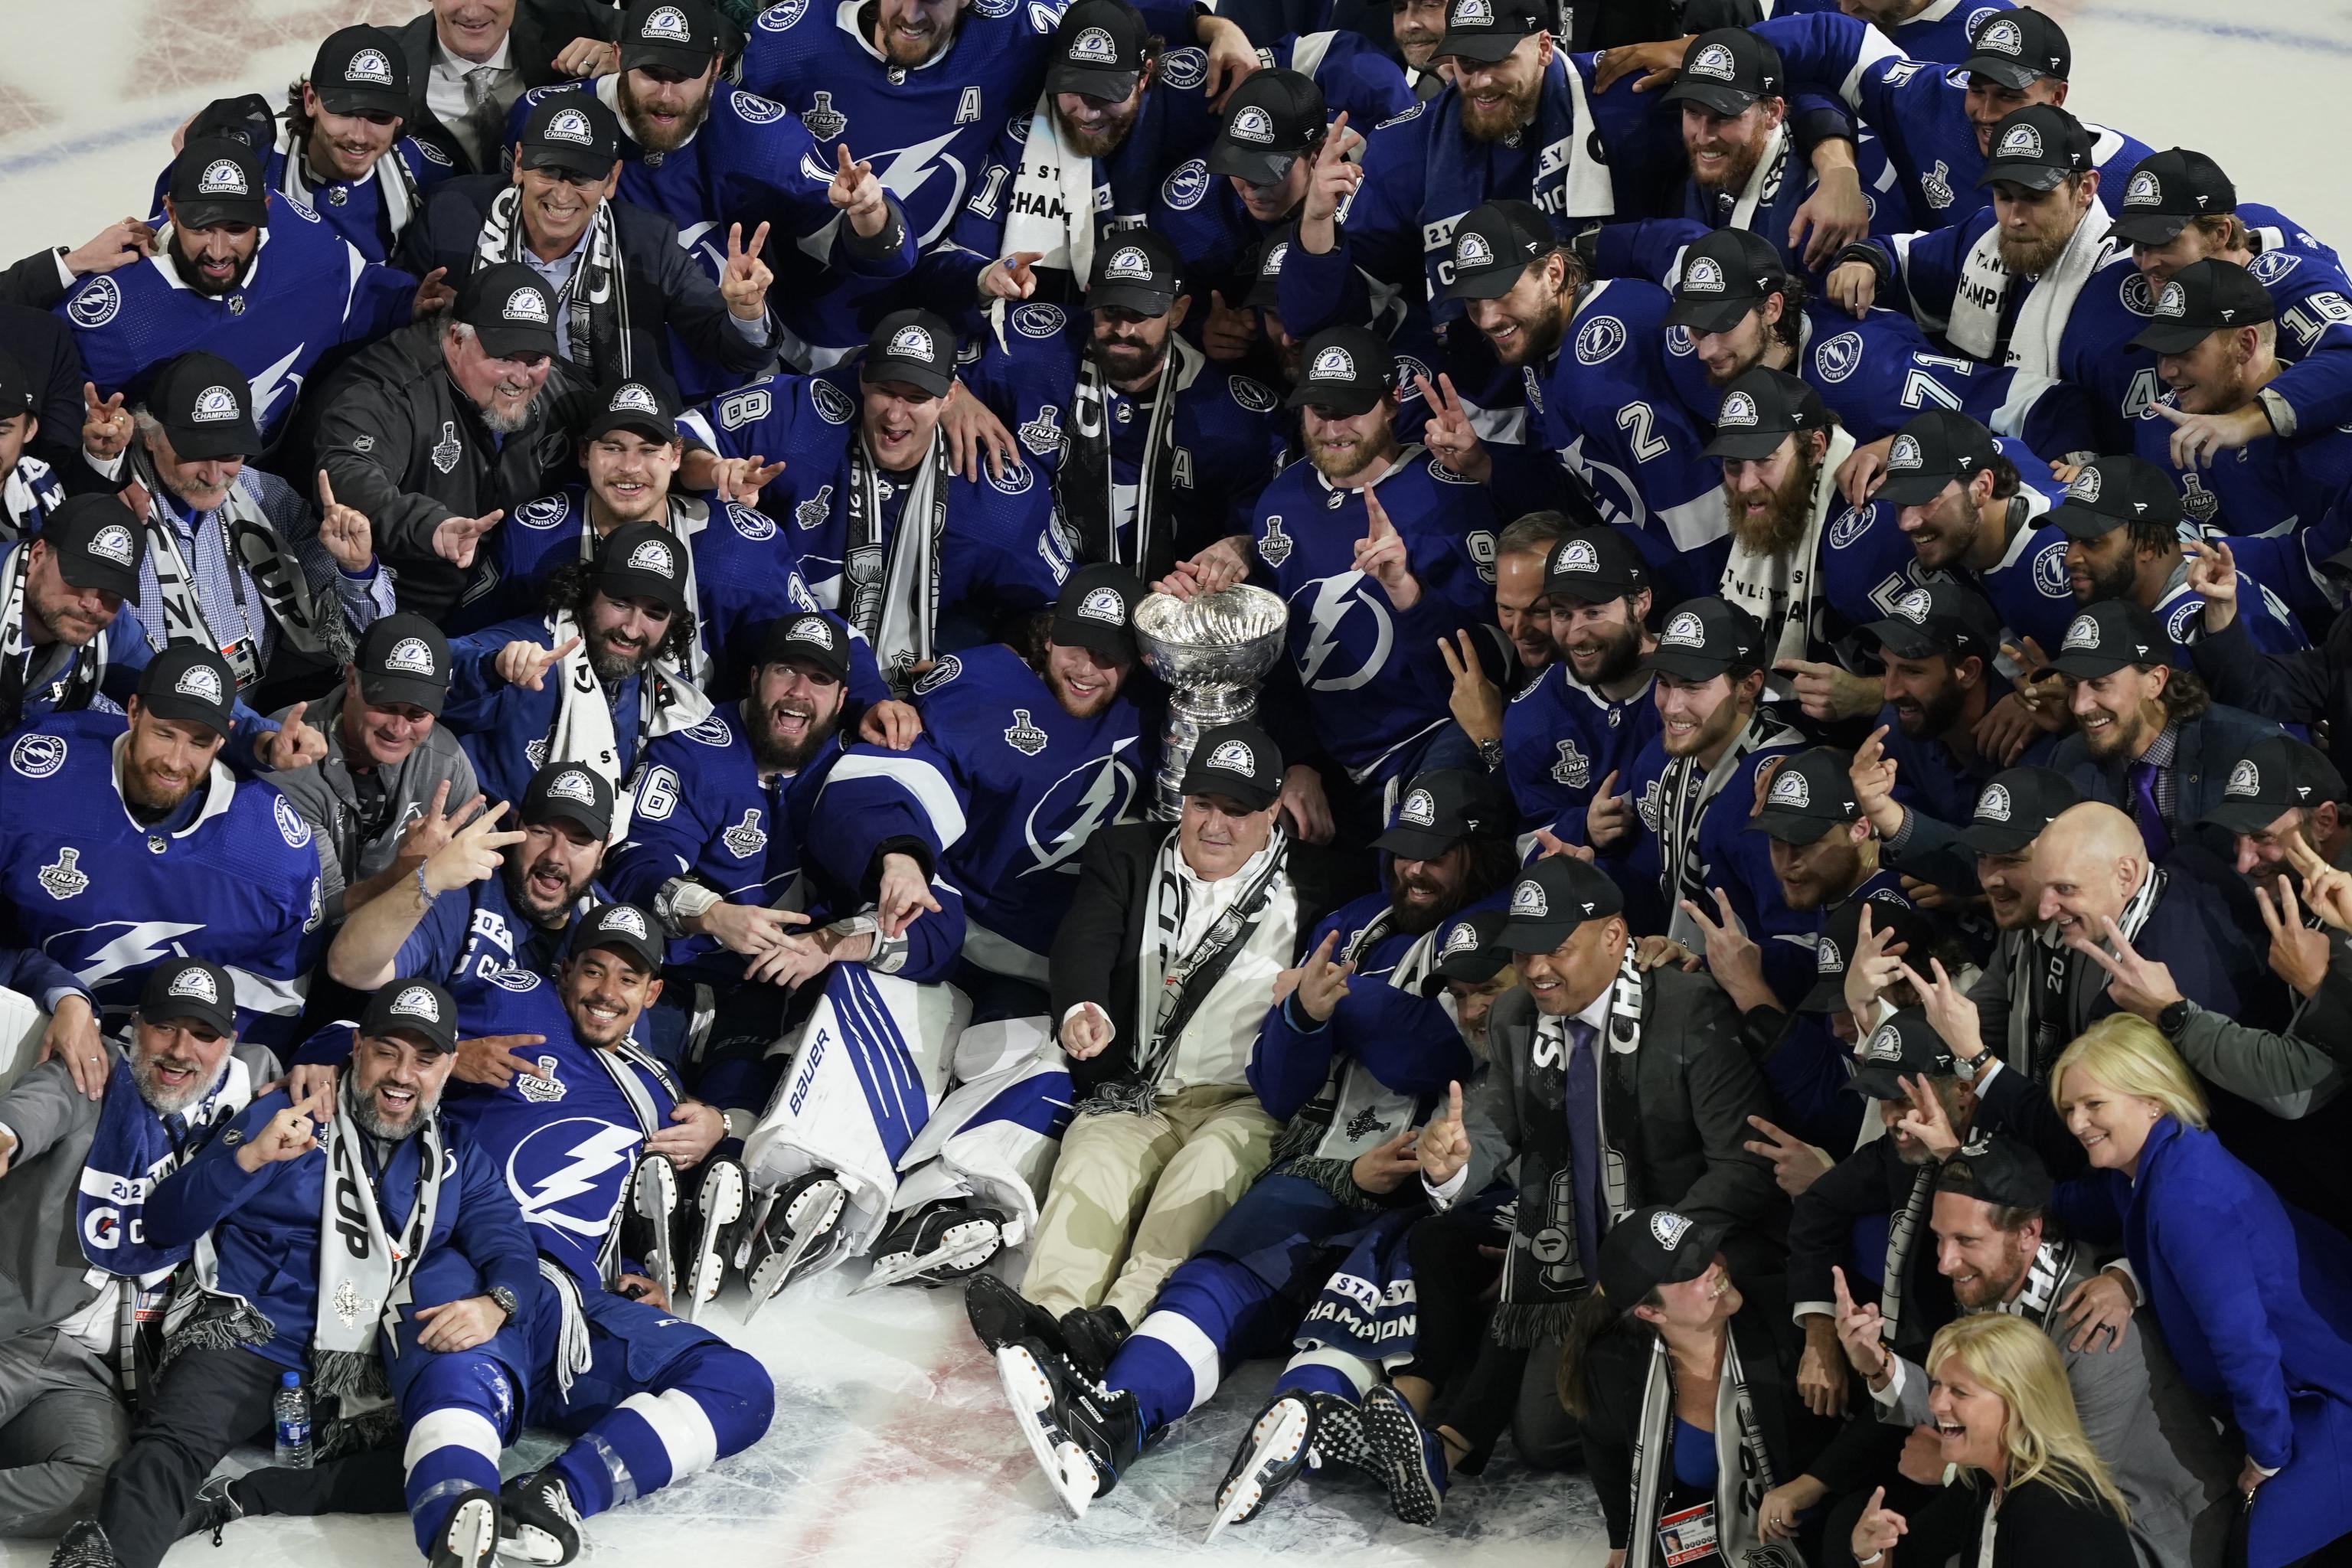 Tampa Bay Lightning win back-to-back Stanley Cups: How to buy NHL